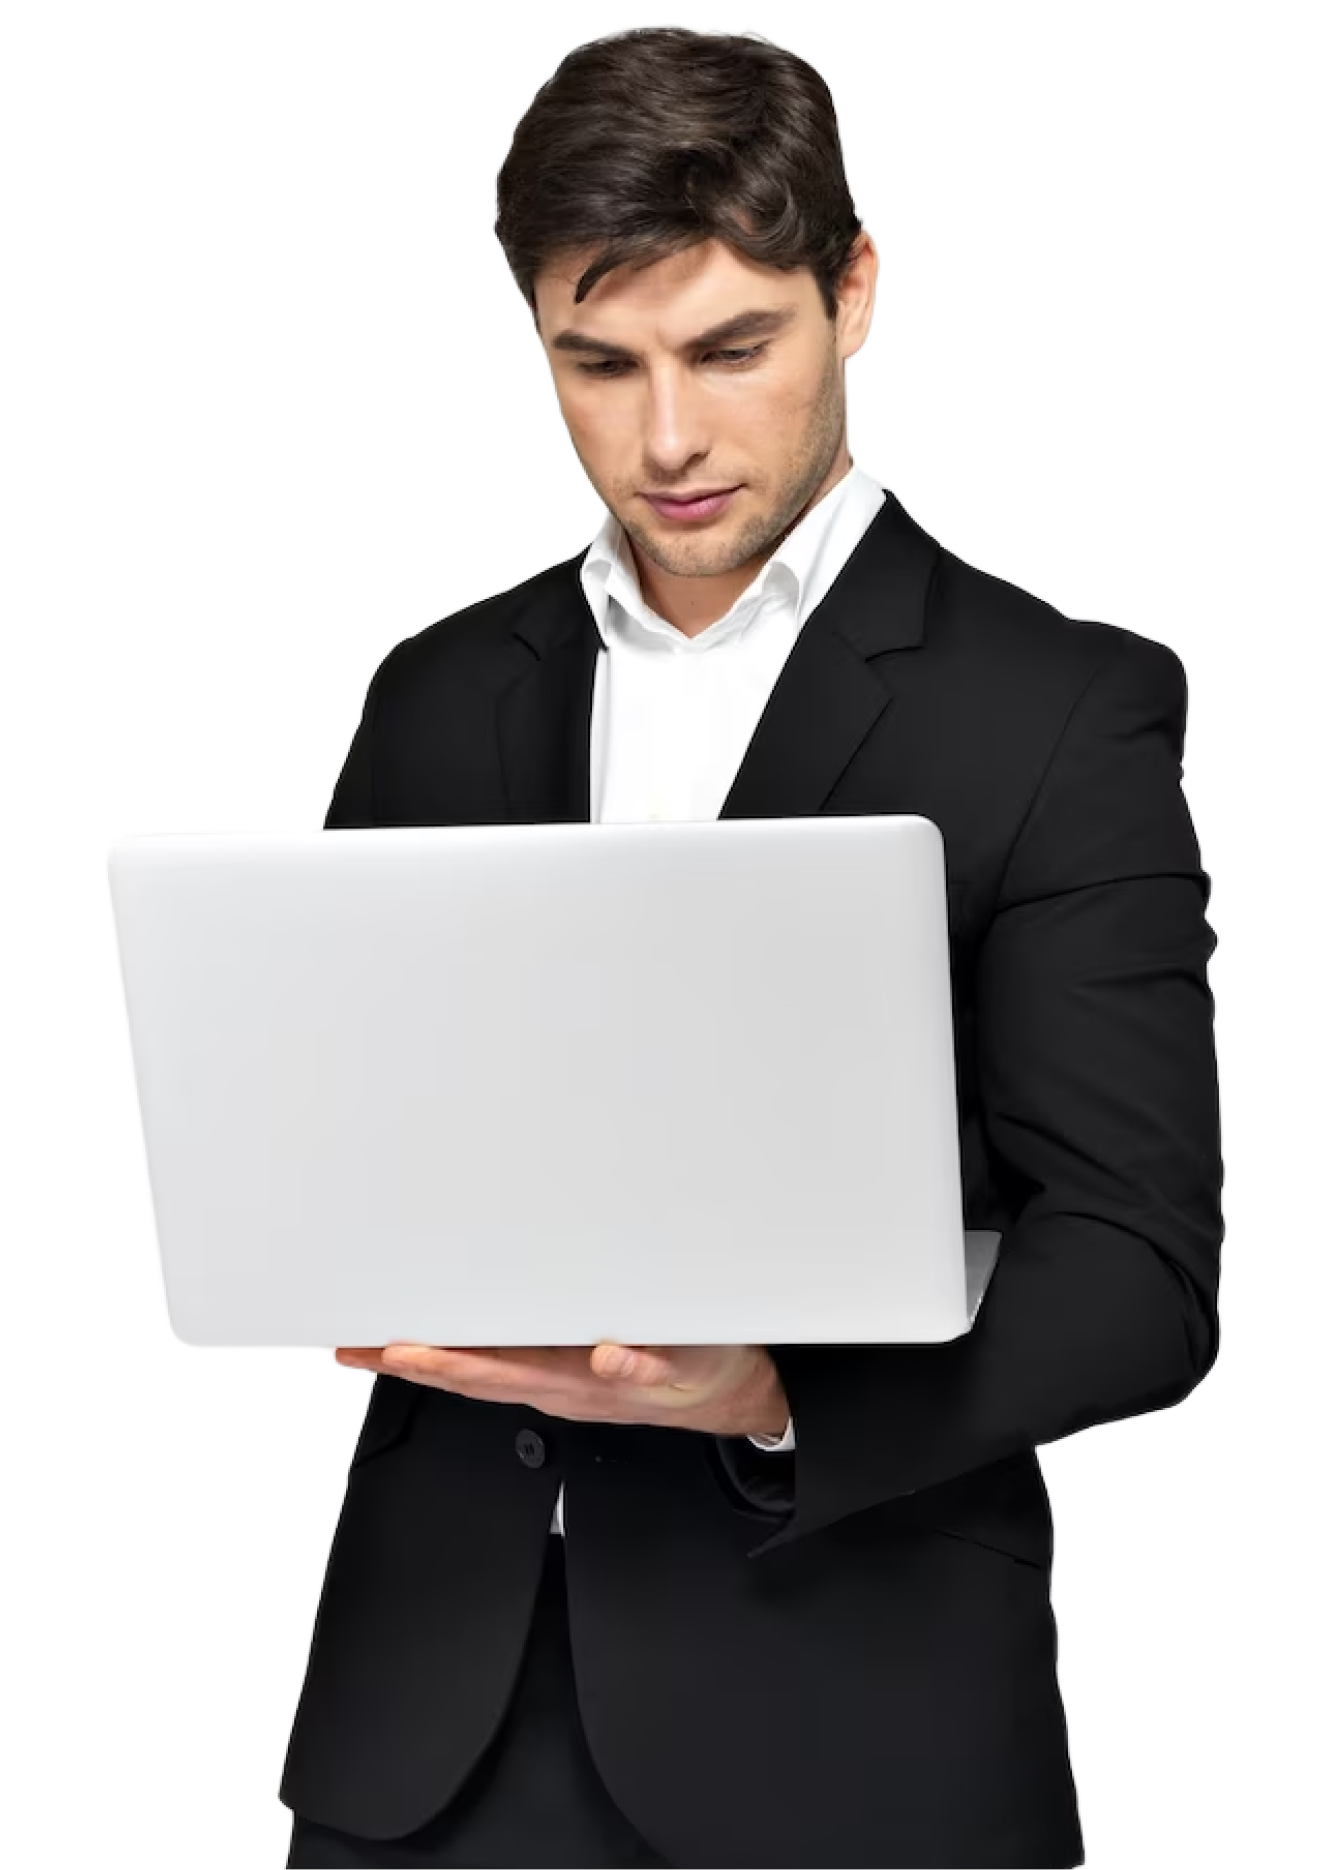 A man in a suit is holding a laptop computer in his hands.